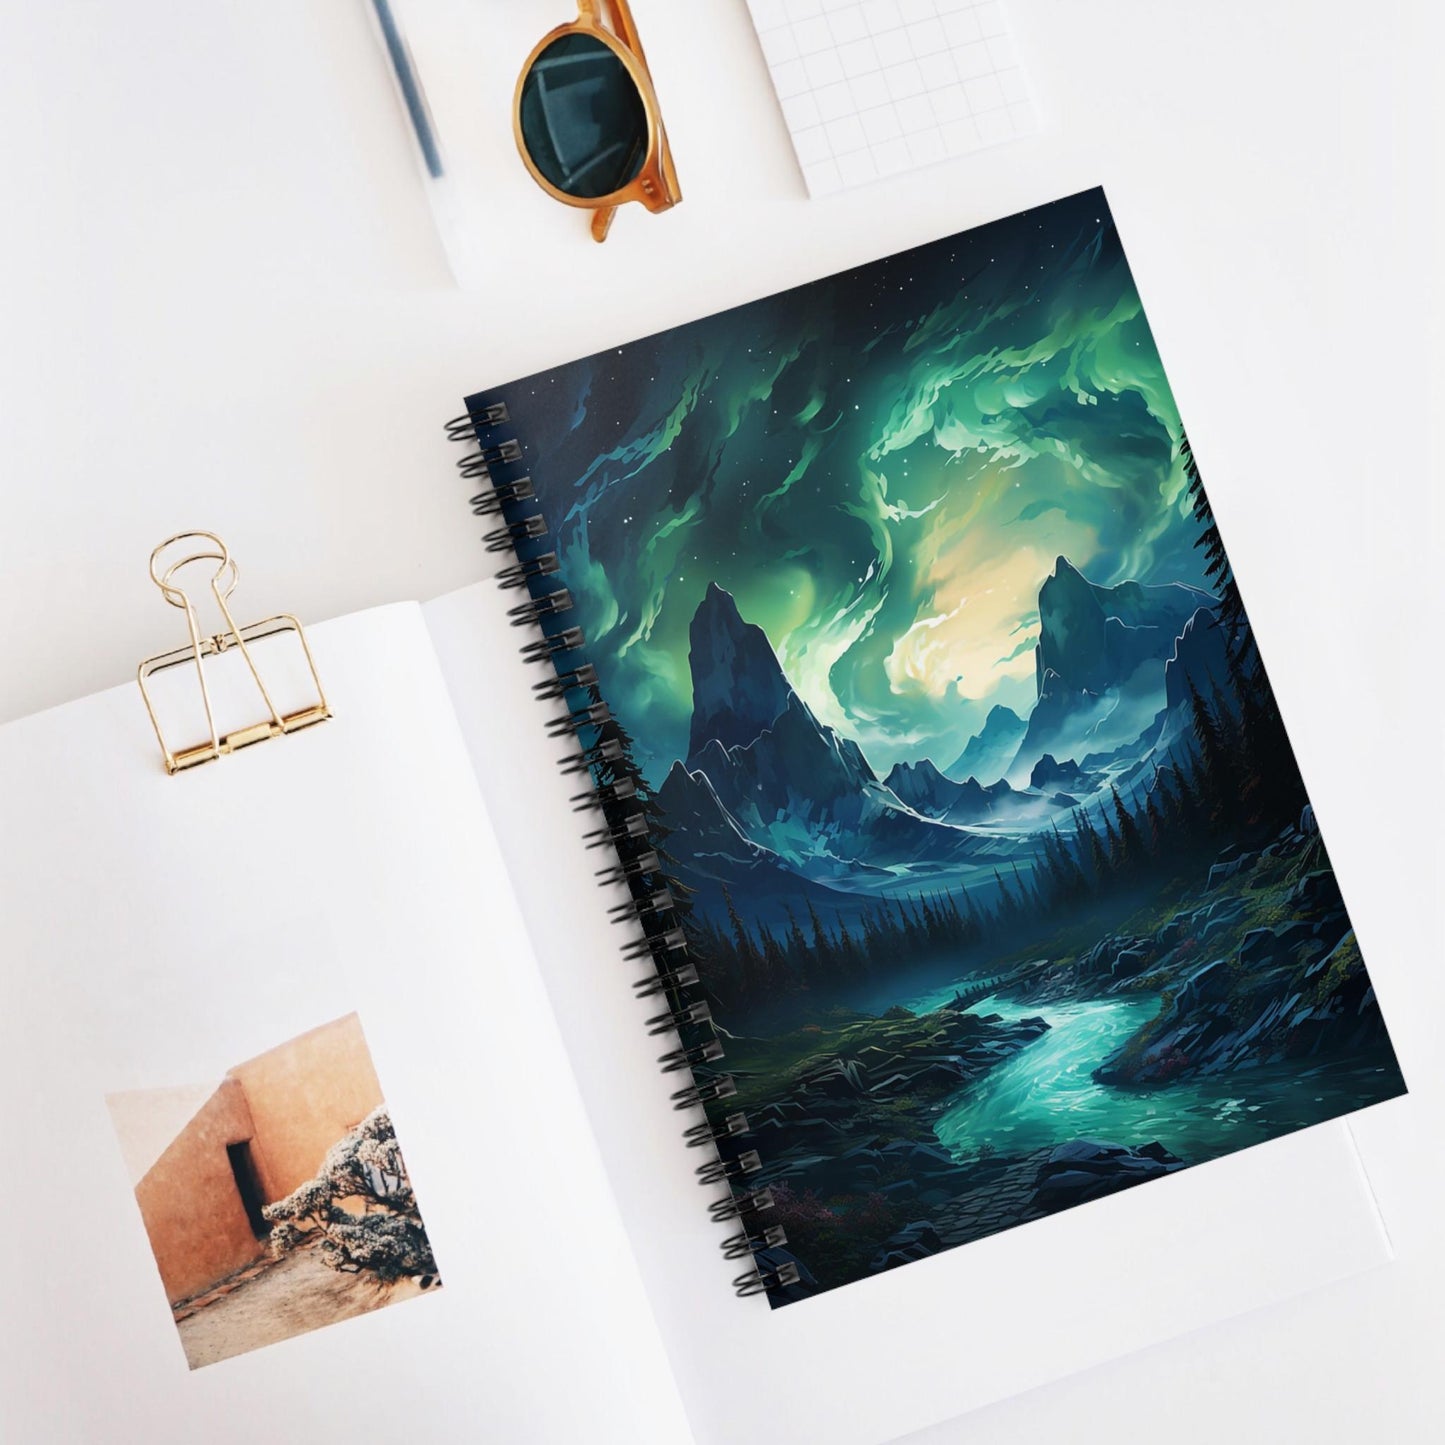 Unique Aurora Borealis Spiral Notebook Ruled Line - Personalized Northern Light View - Stationary Accessories - Perfect Aurora Lovers Gift 27